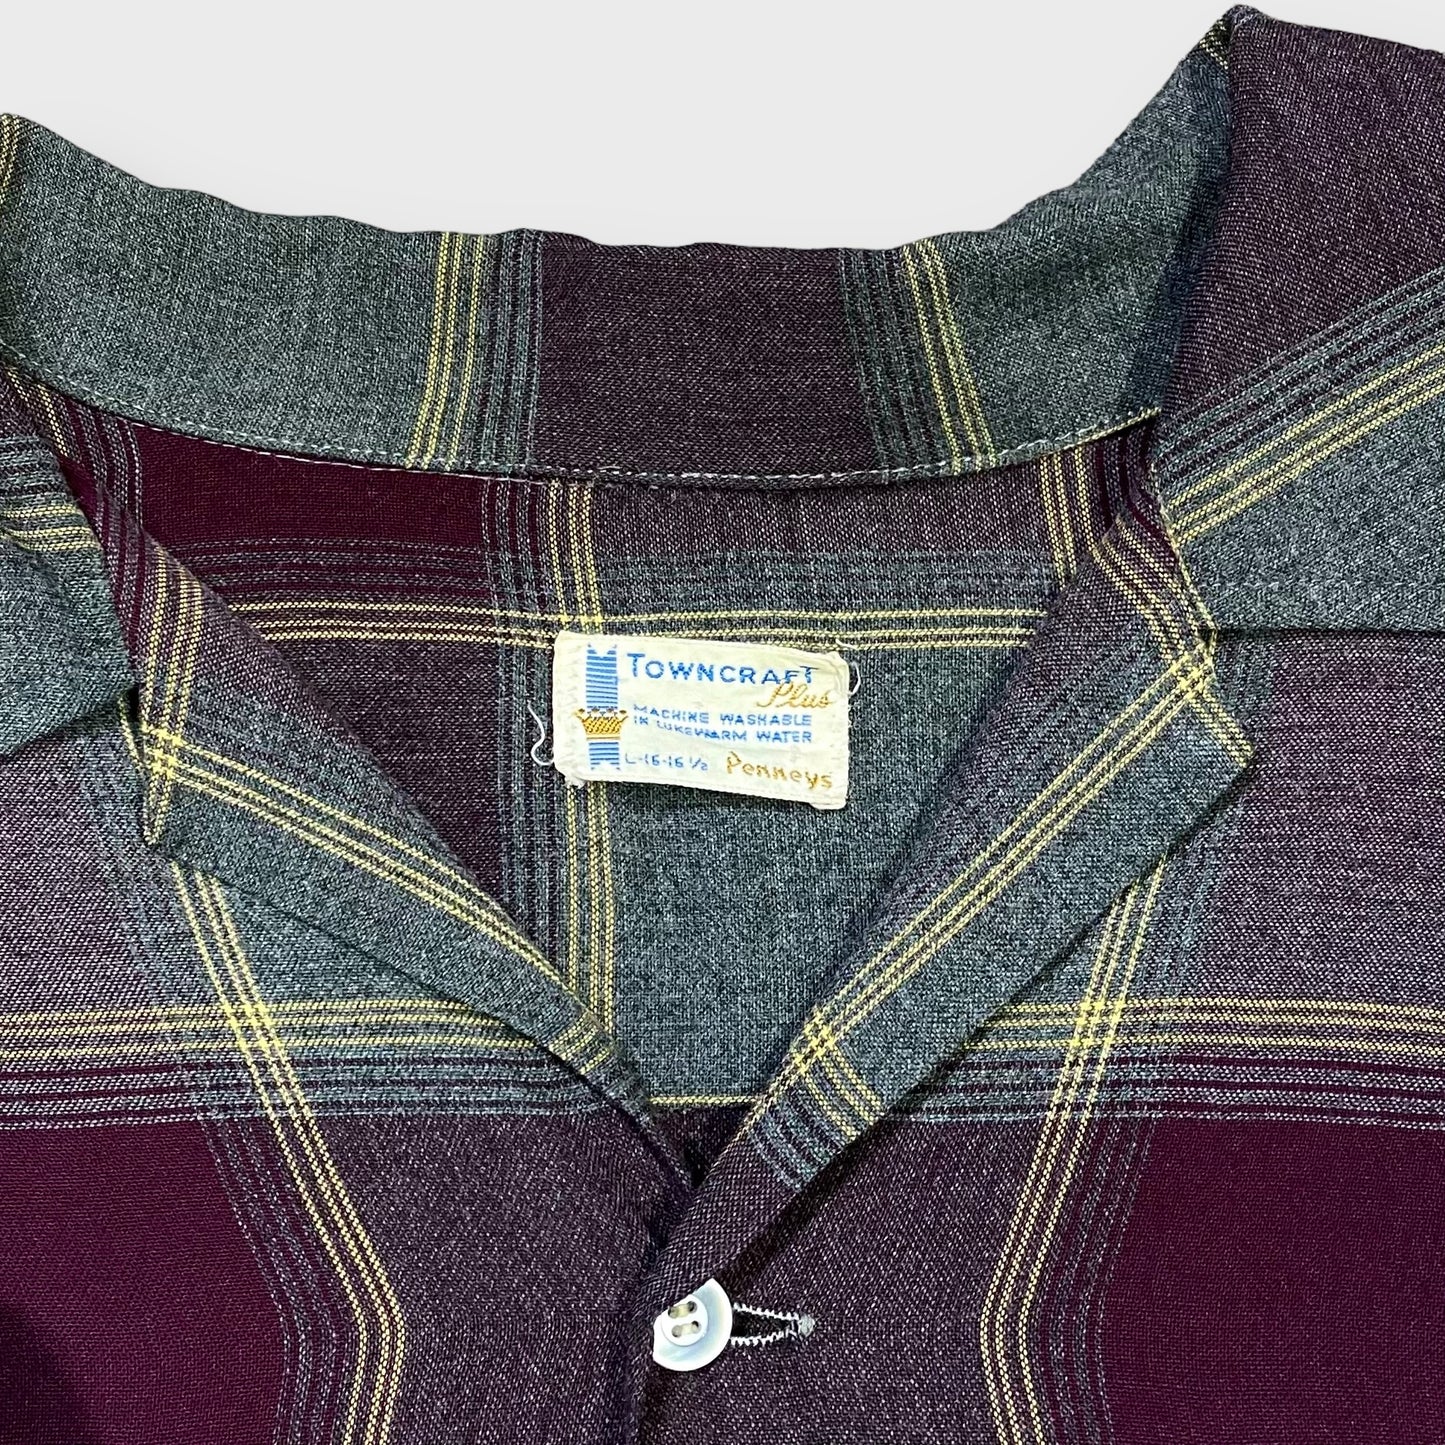 60's "Penneys TOWNCRAFT" Ombre check pattern rayon shirt